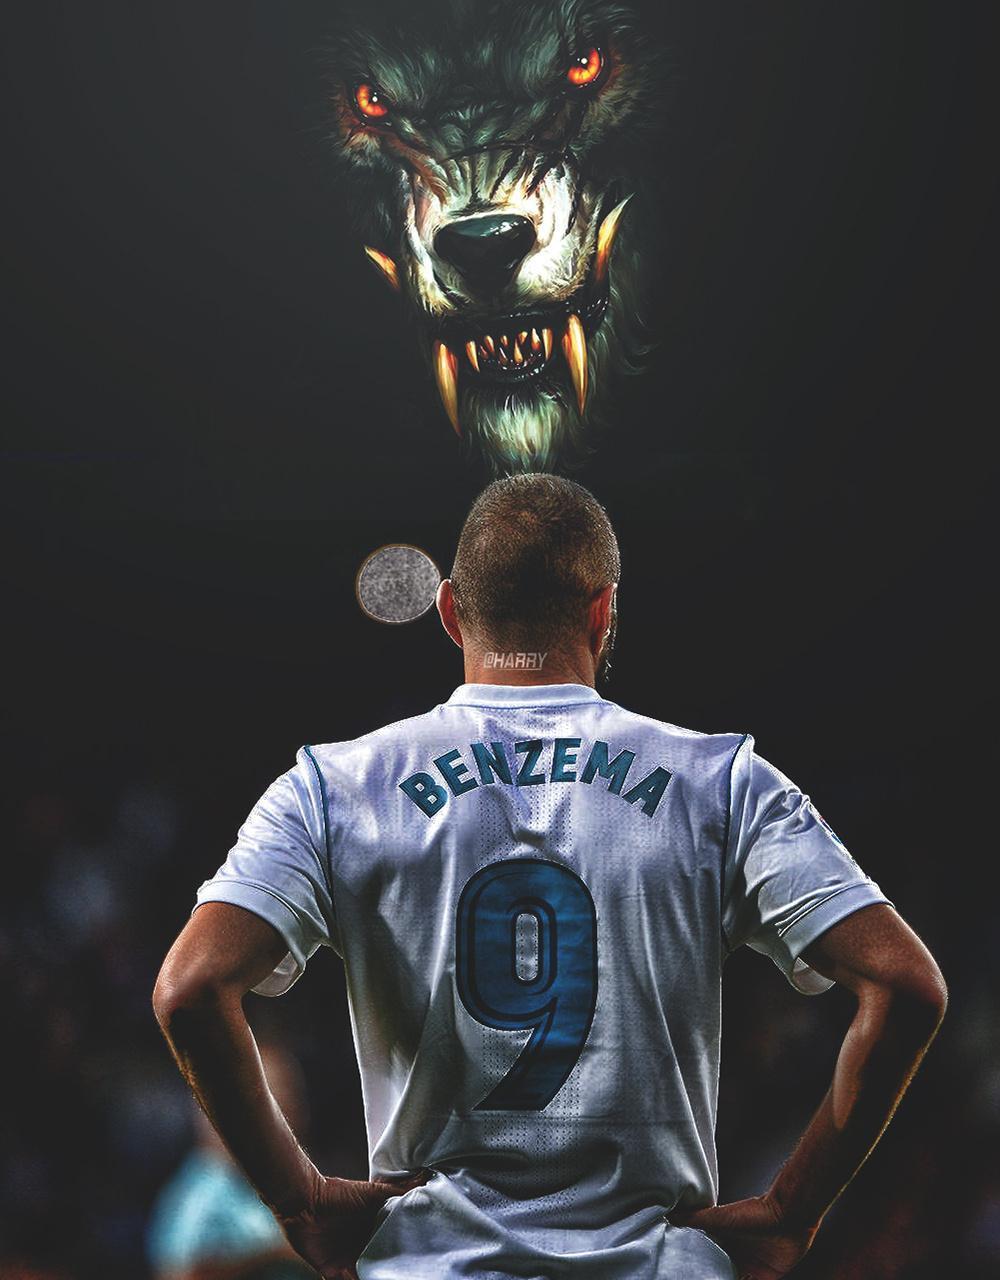 Karim Benzema Wallpaper for Android - APK Download